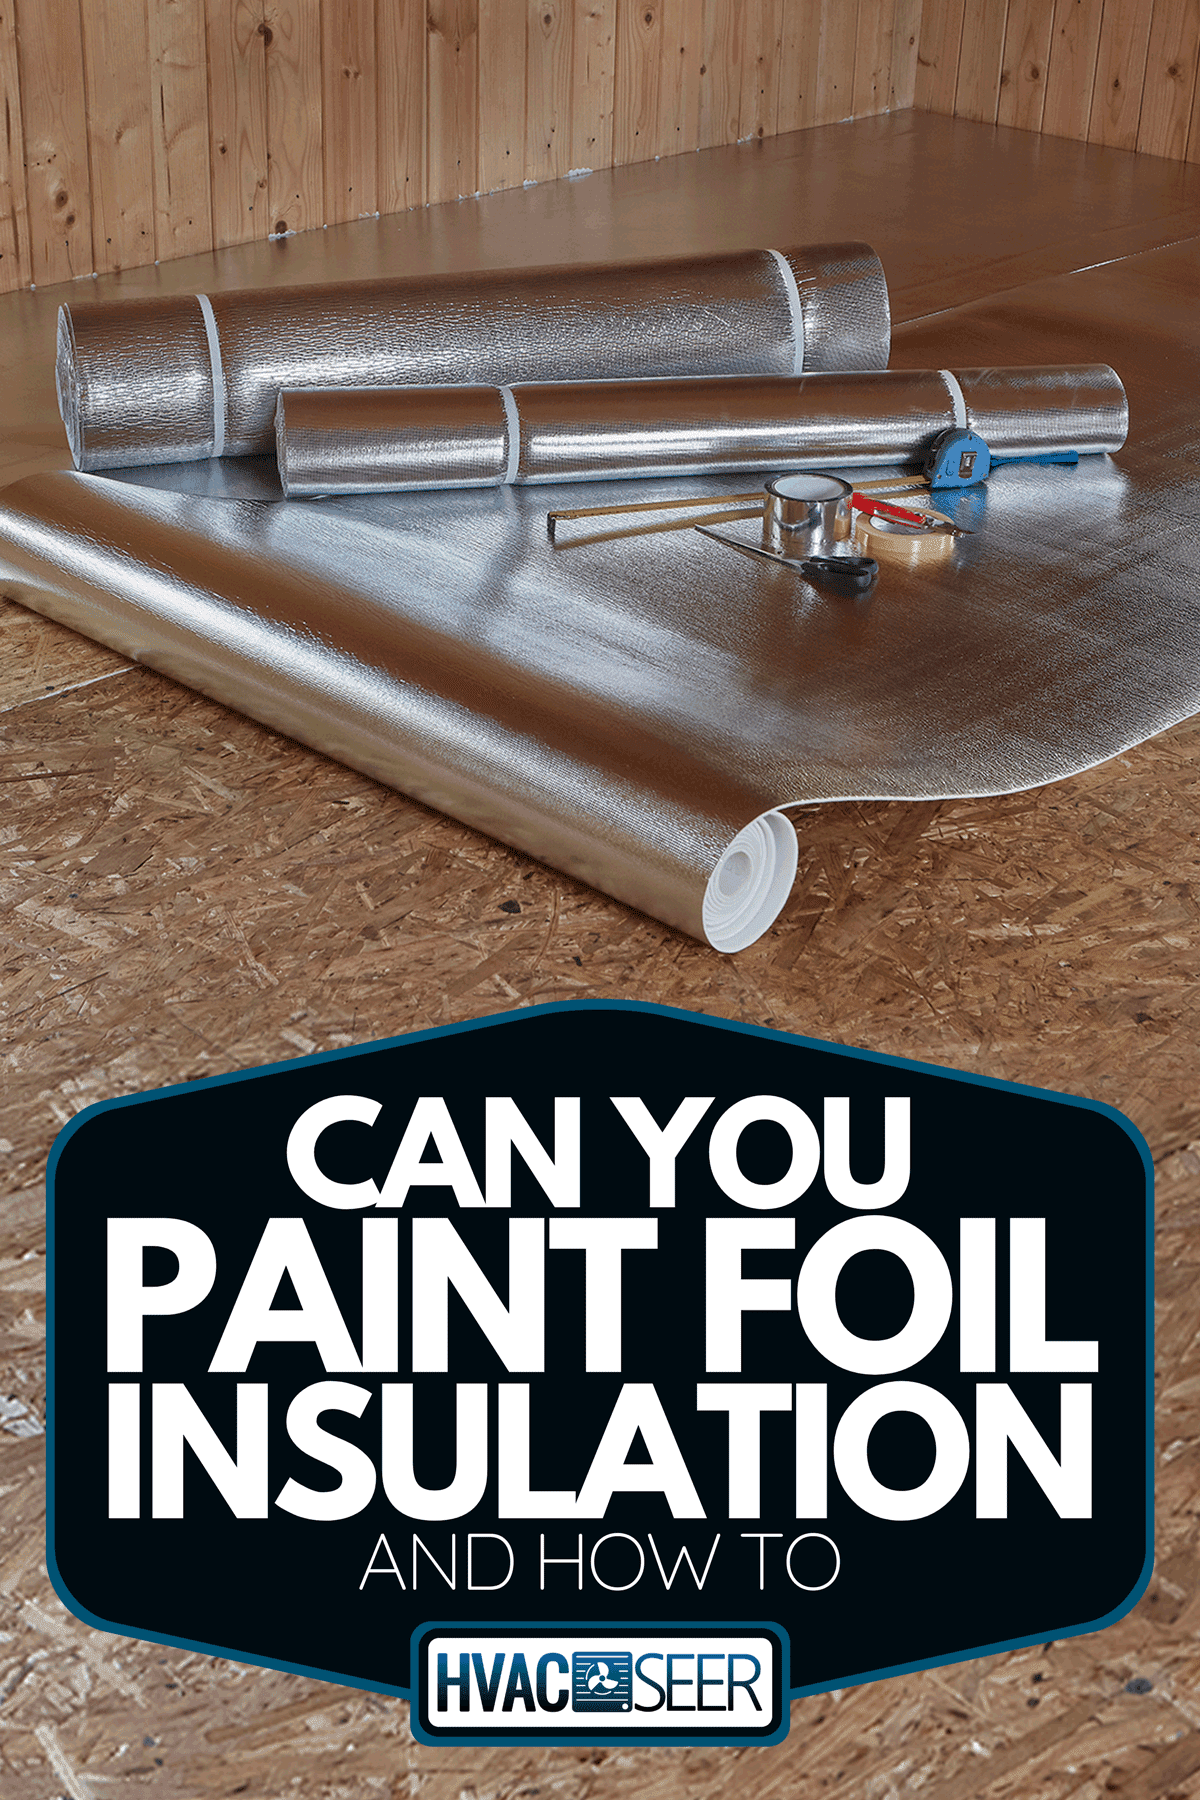 A covering thermal insulation in the room of the country house, Can You Paint Foil Insulation [And How To]